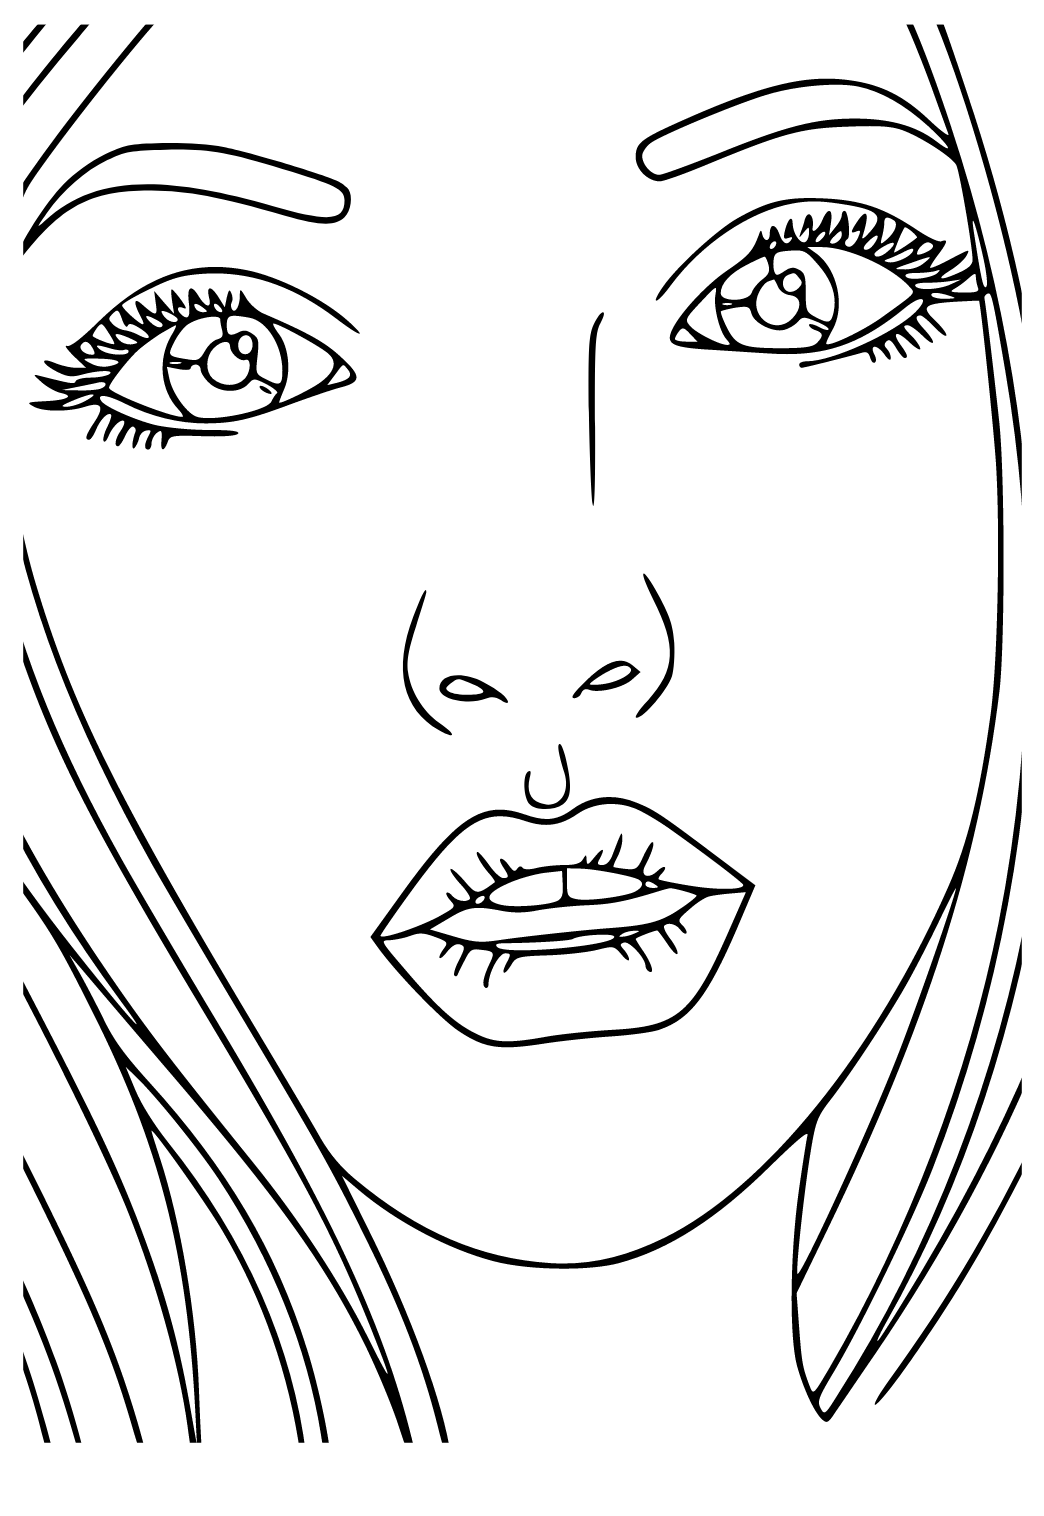 Free printable people face coloring page for adults and kids